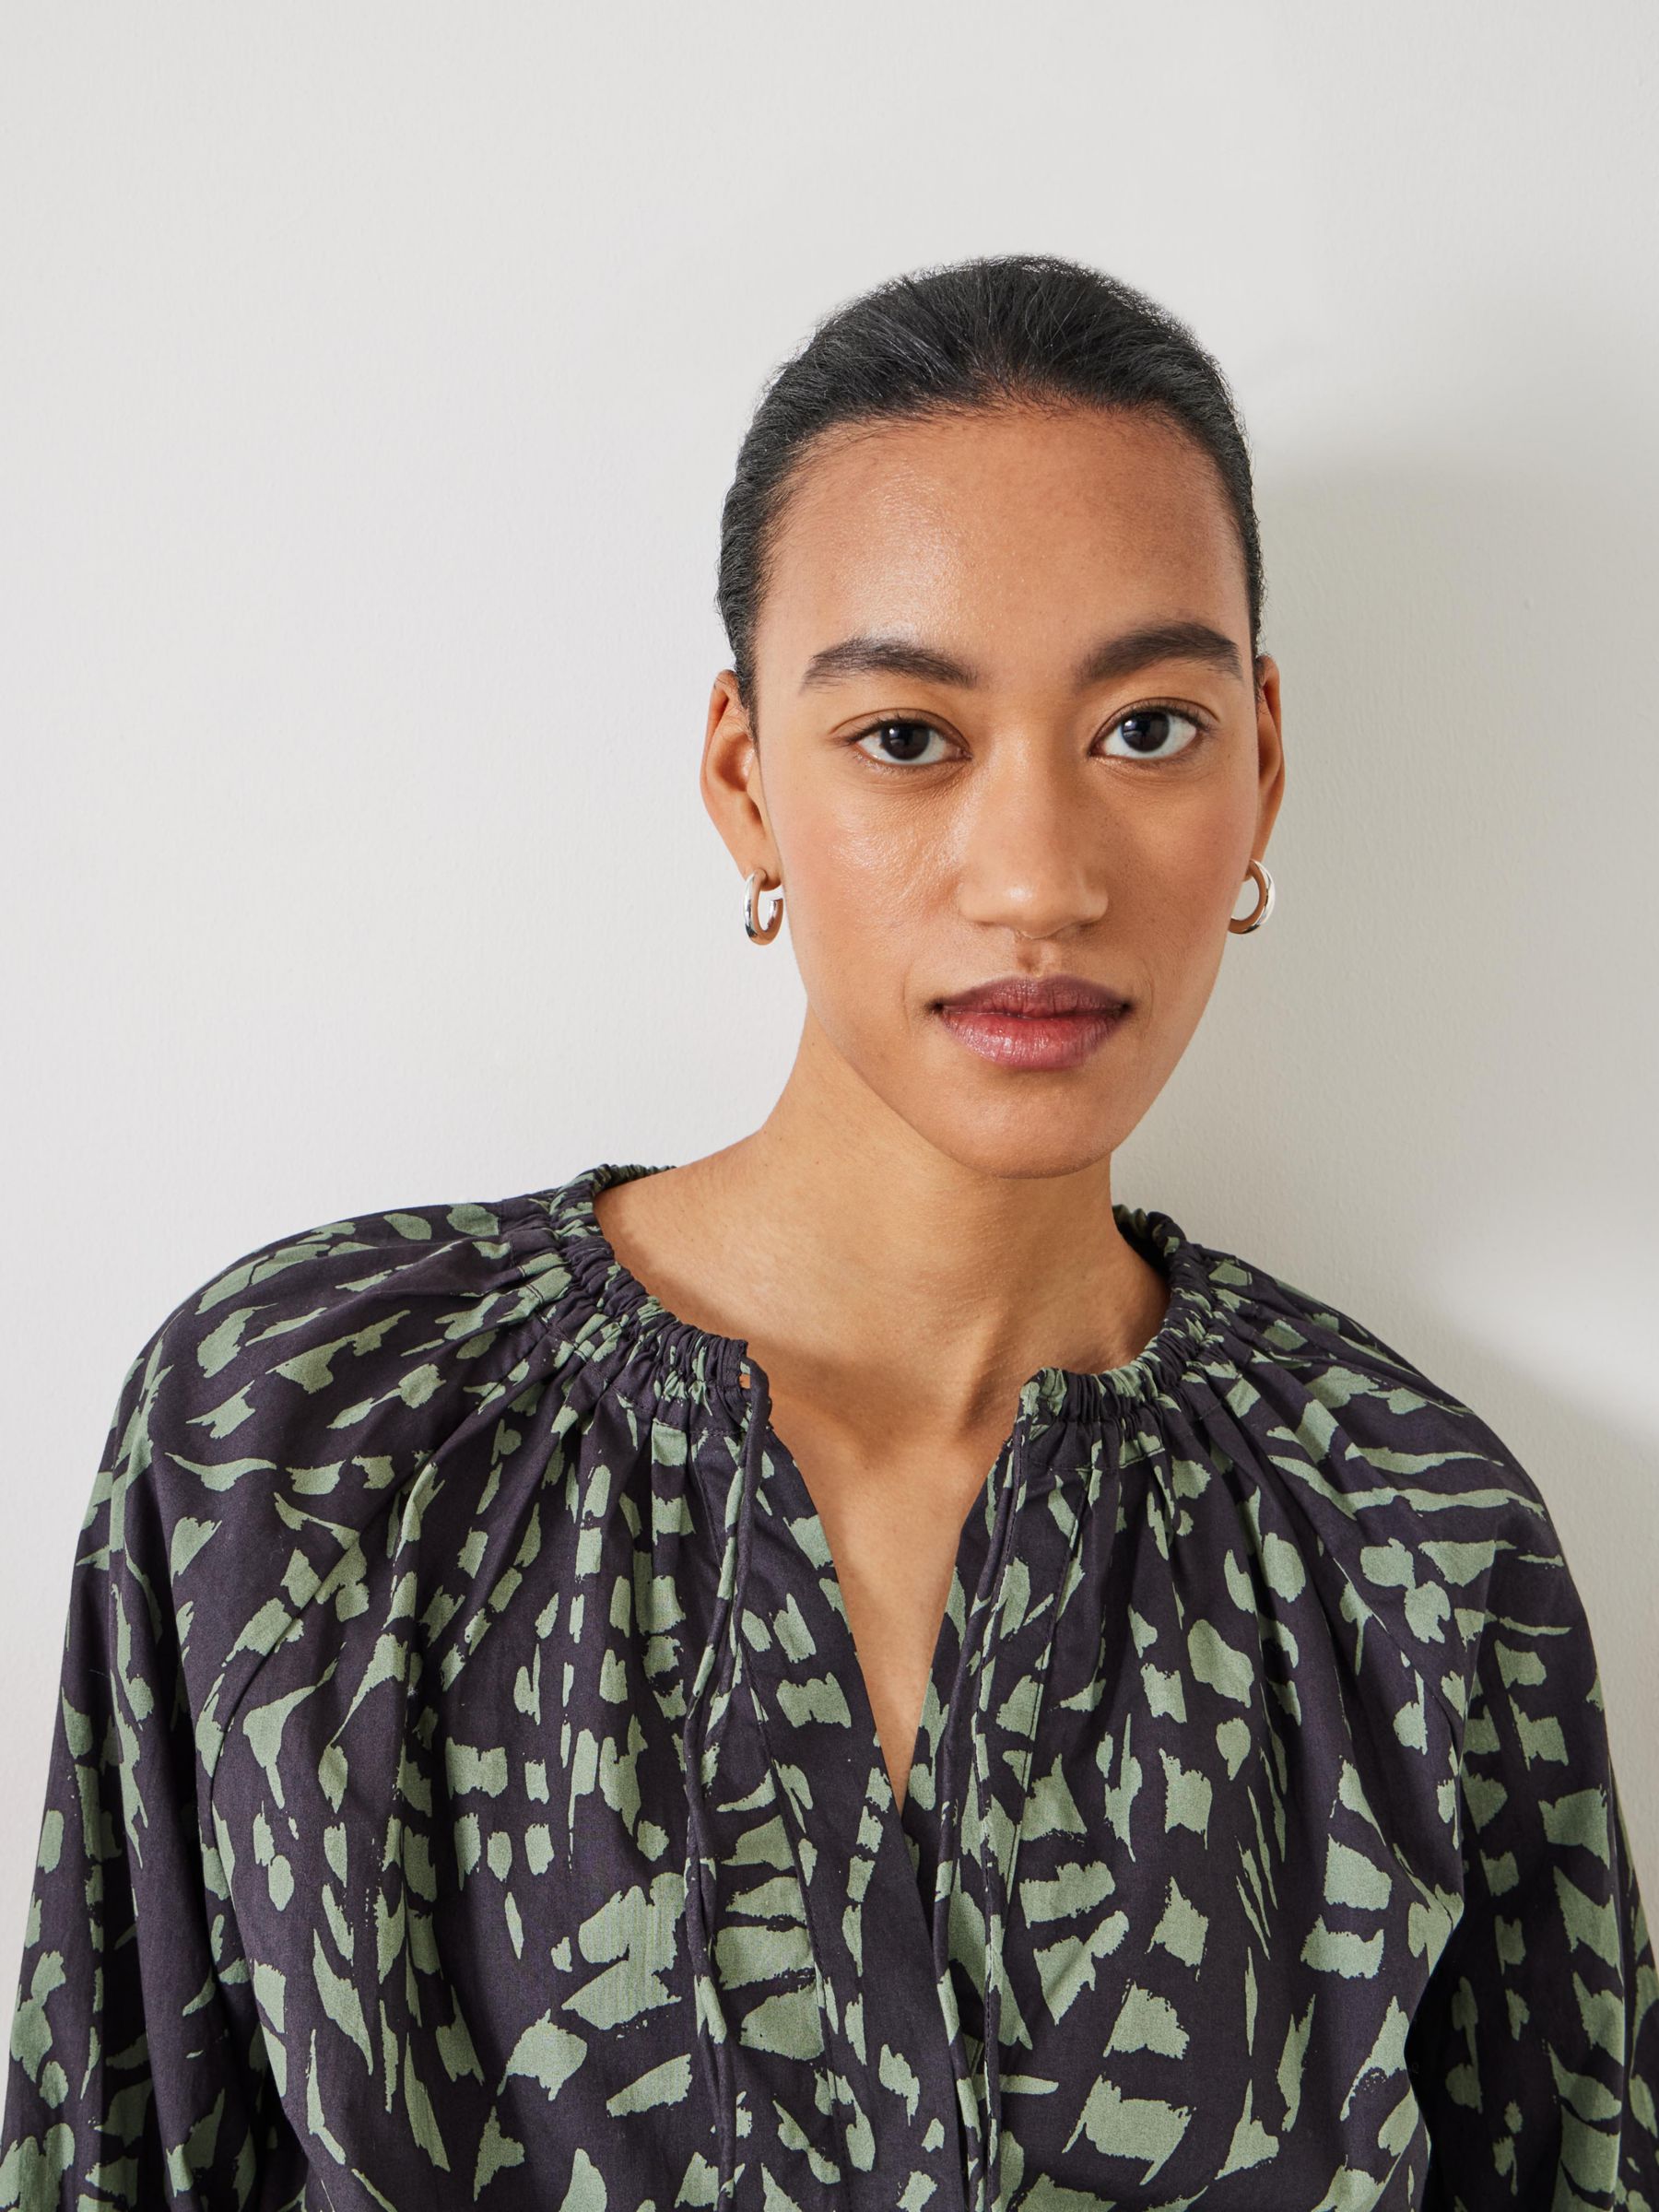 Buy HUSH Monika Cotton Tie Blouse, Abstract Boho Charcoal Online at johnlewis.com